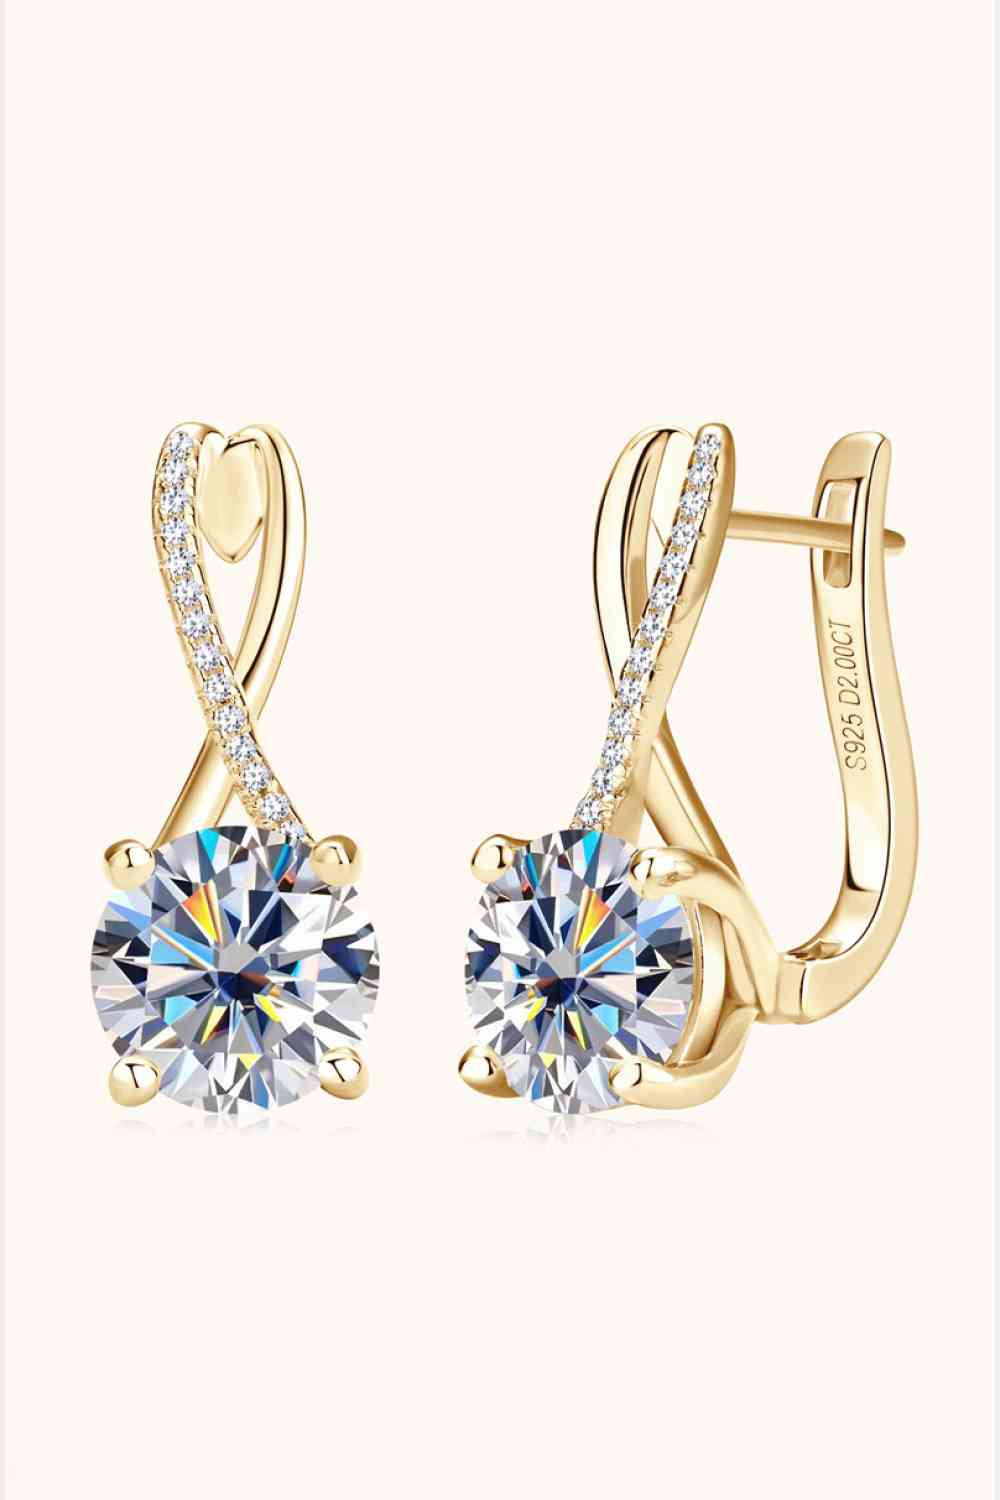 4 Carat Moissanite 925 Sterling Silver Earrings - Shop Tophatter Deals, Electronics, Fashion, Jewelry, Health, Beauty, Home Decor, Free Shipping